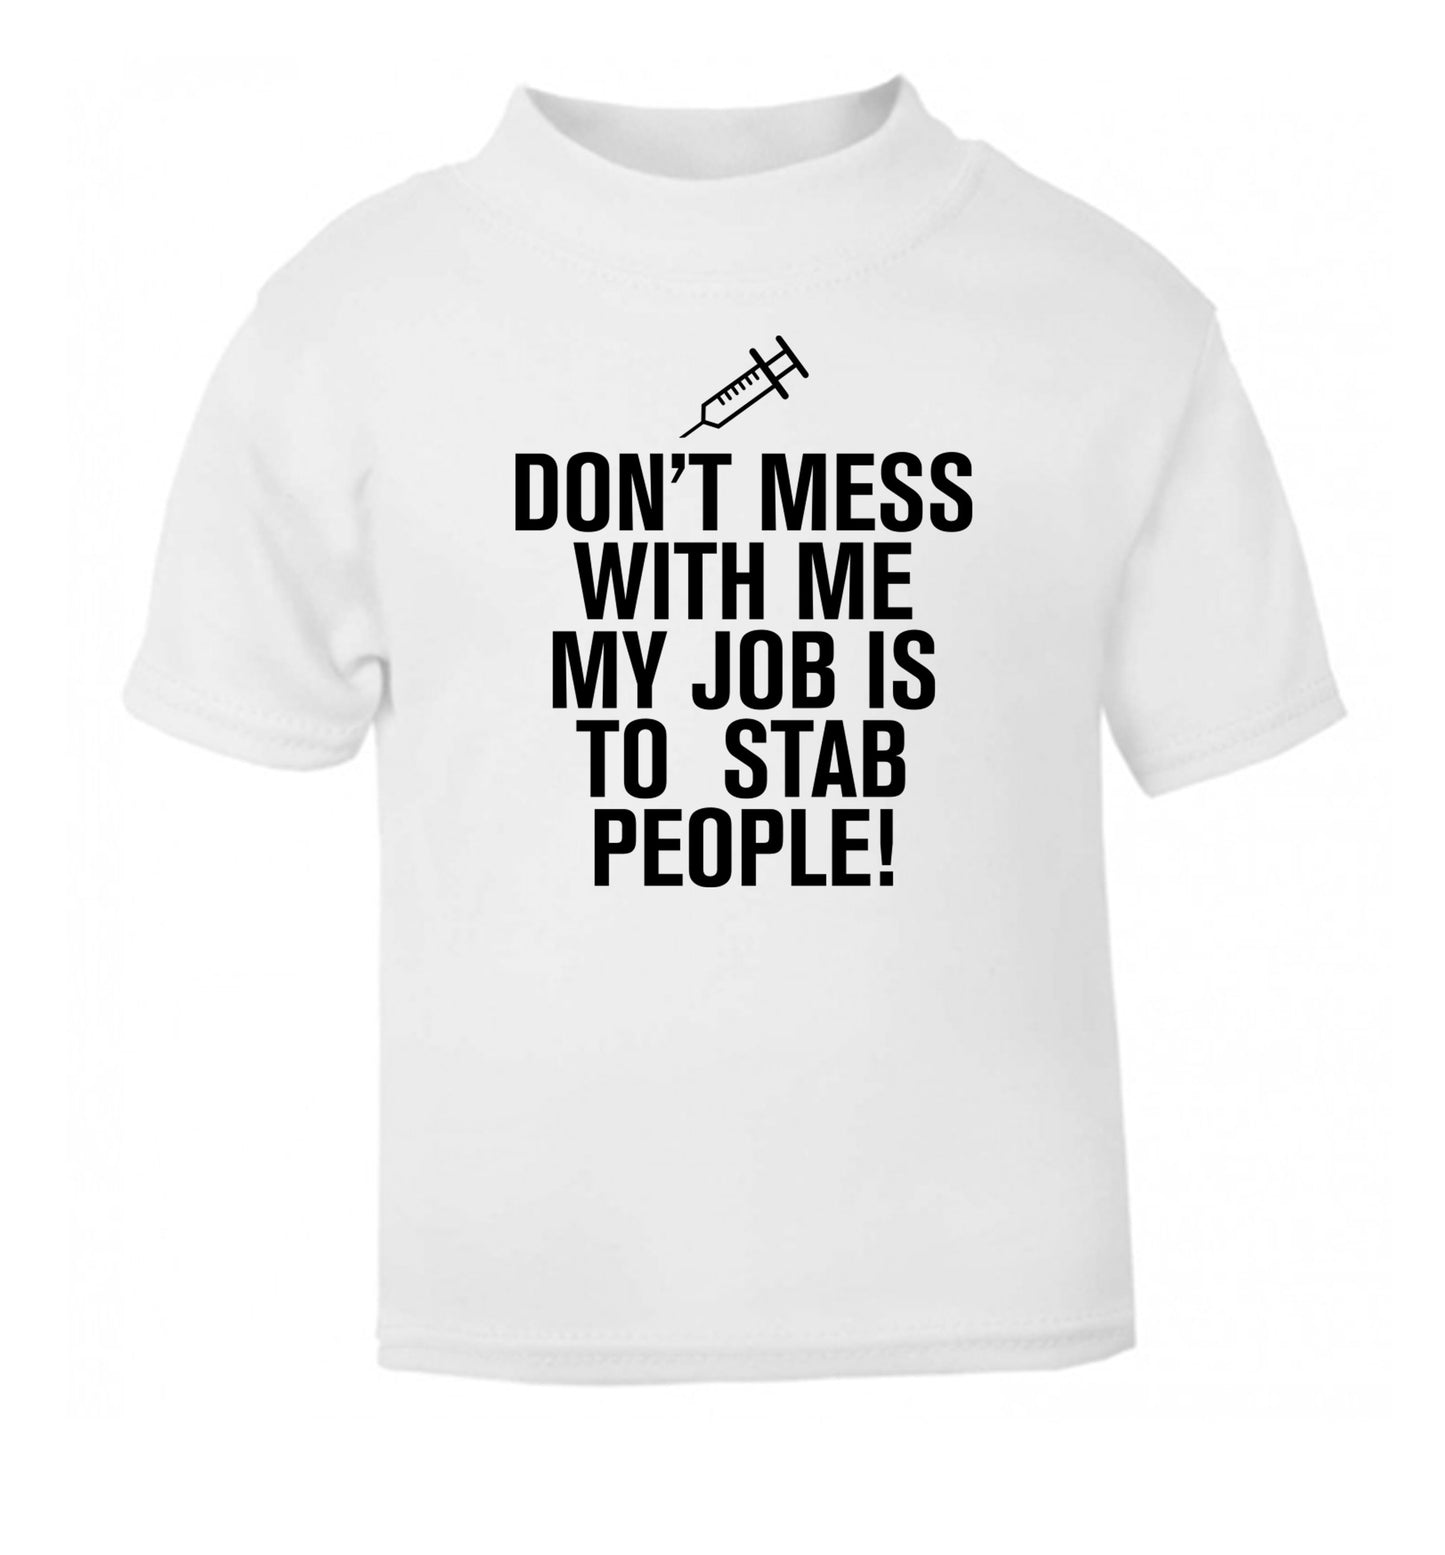 Don't mess with me my job is to stab people! white Baby Toddler Tshirt 2 Years